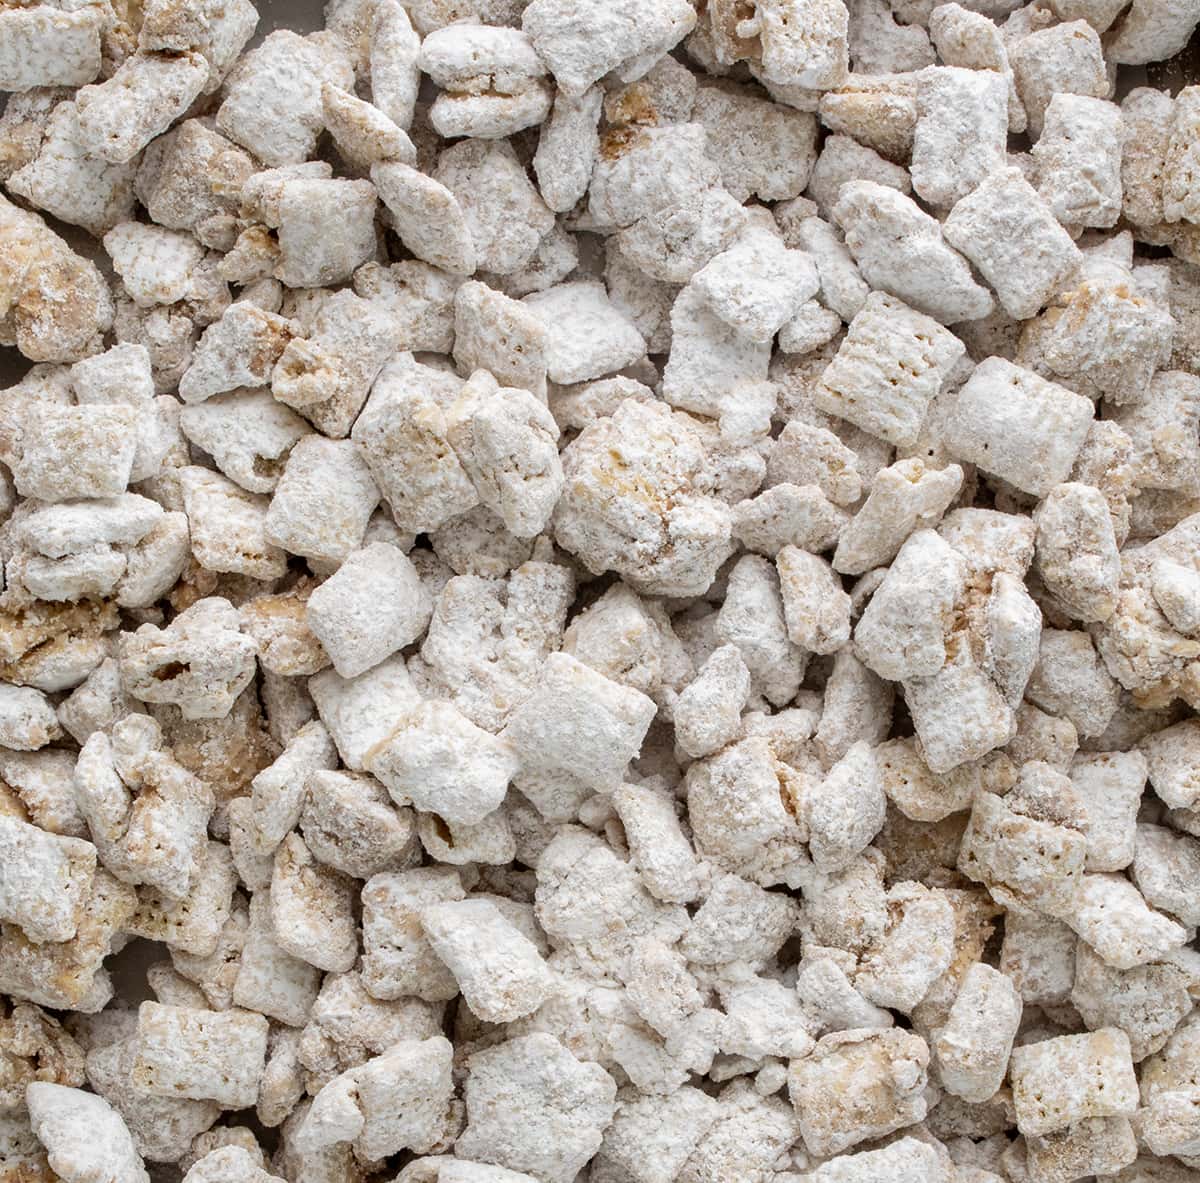 Close up of a tray of Pumpkin Spice Puppy Chow.